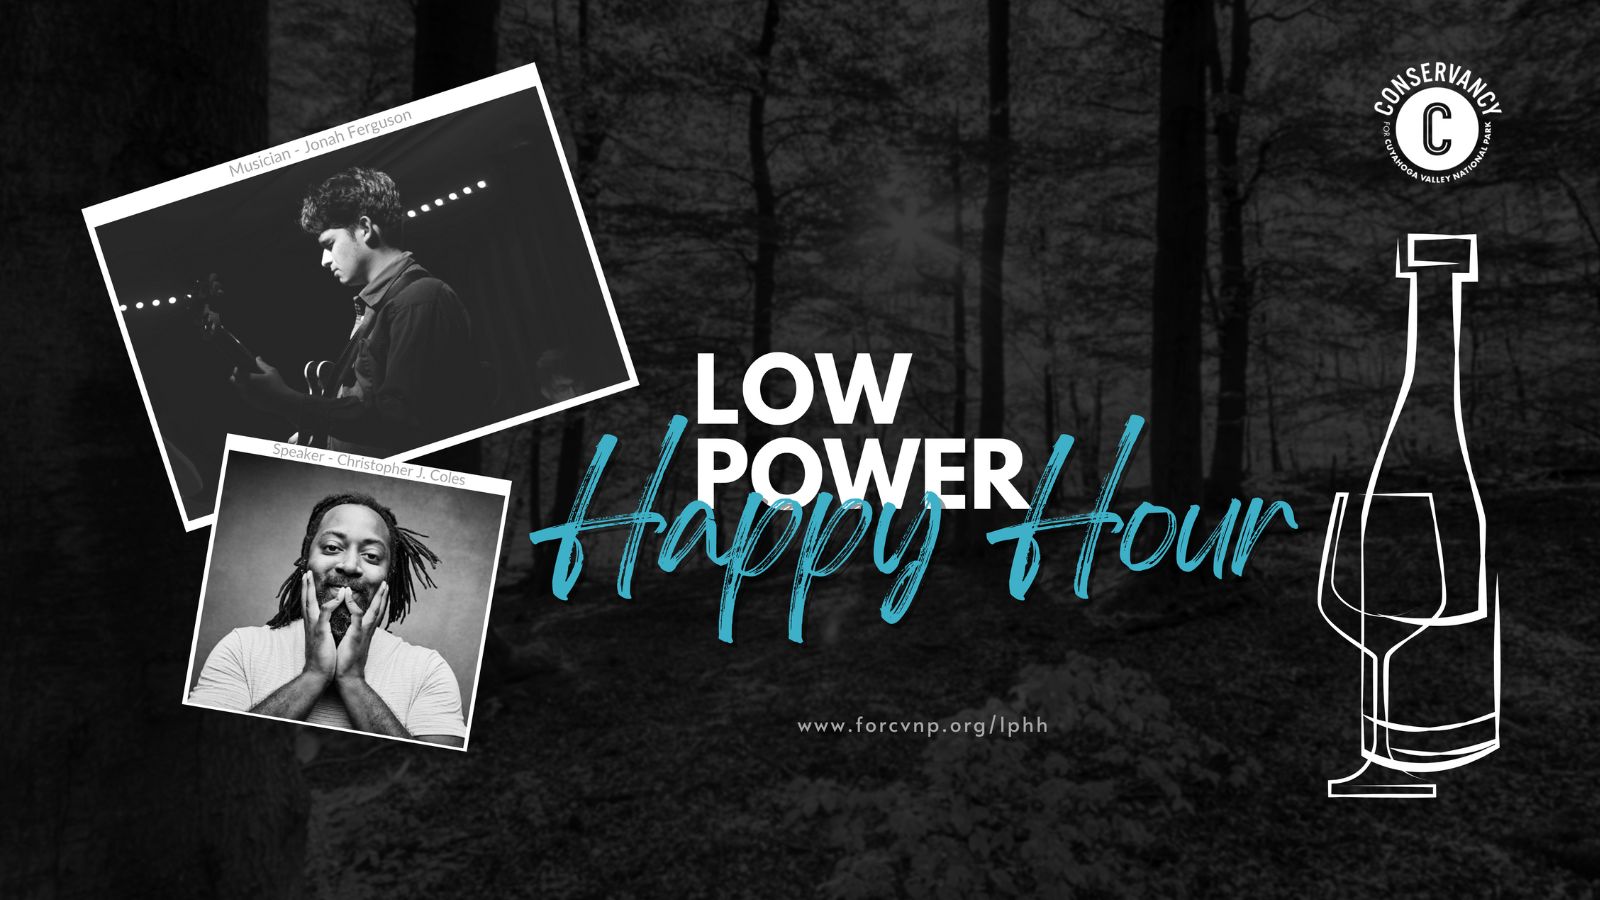 Low Power Happy Hour: With Chris Coles and Jonah Ferguson In November 2022, Peninsula, Ohio, United States